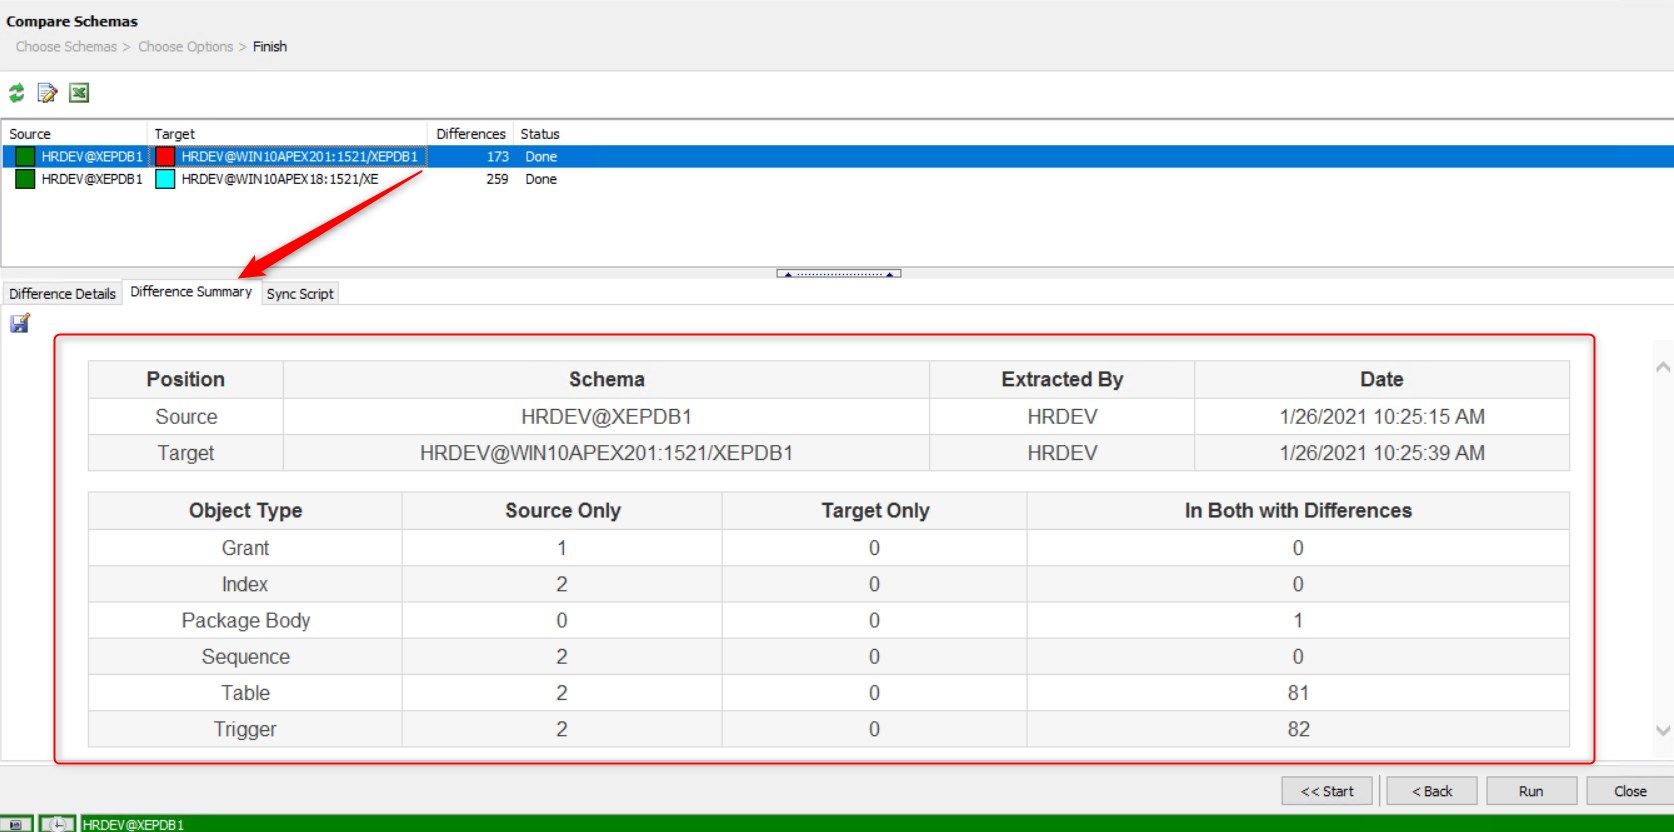 Figure 11: Compare Schemas – Difference Summary Tab for XEPDB1 database target schema